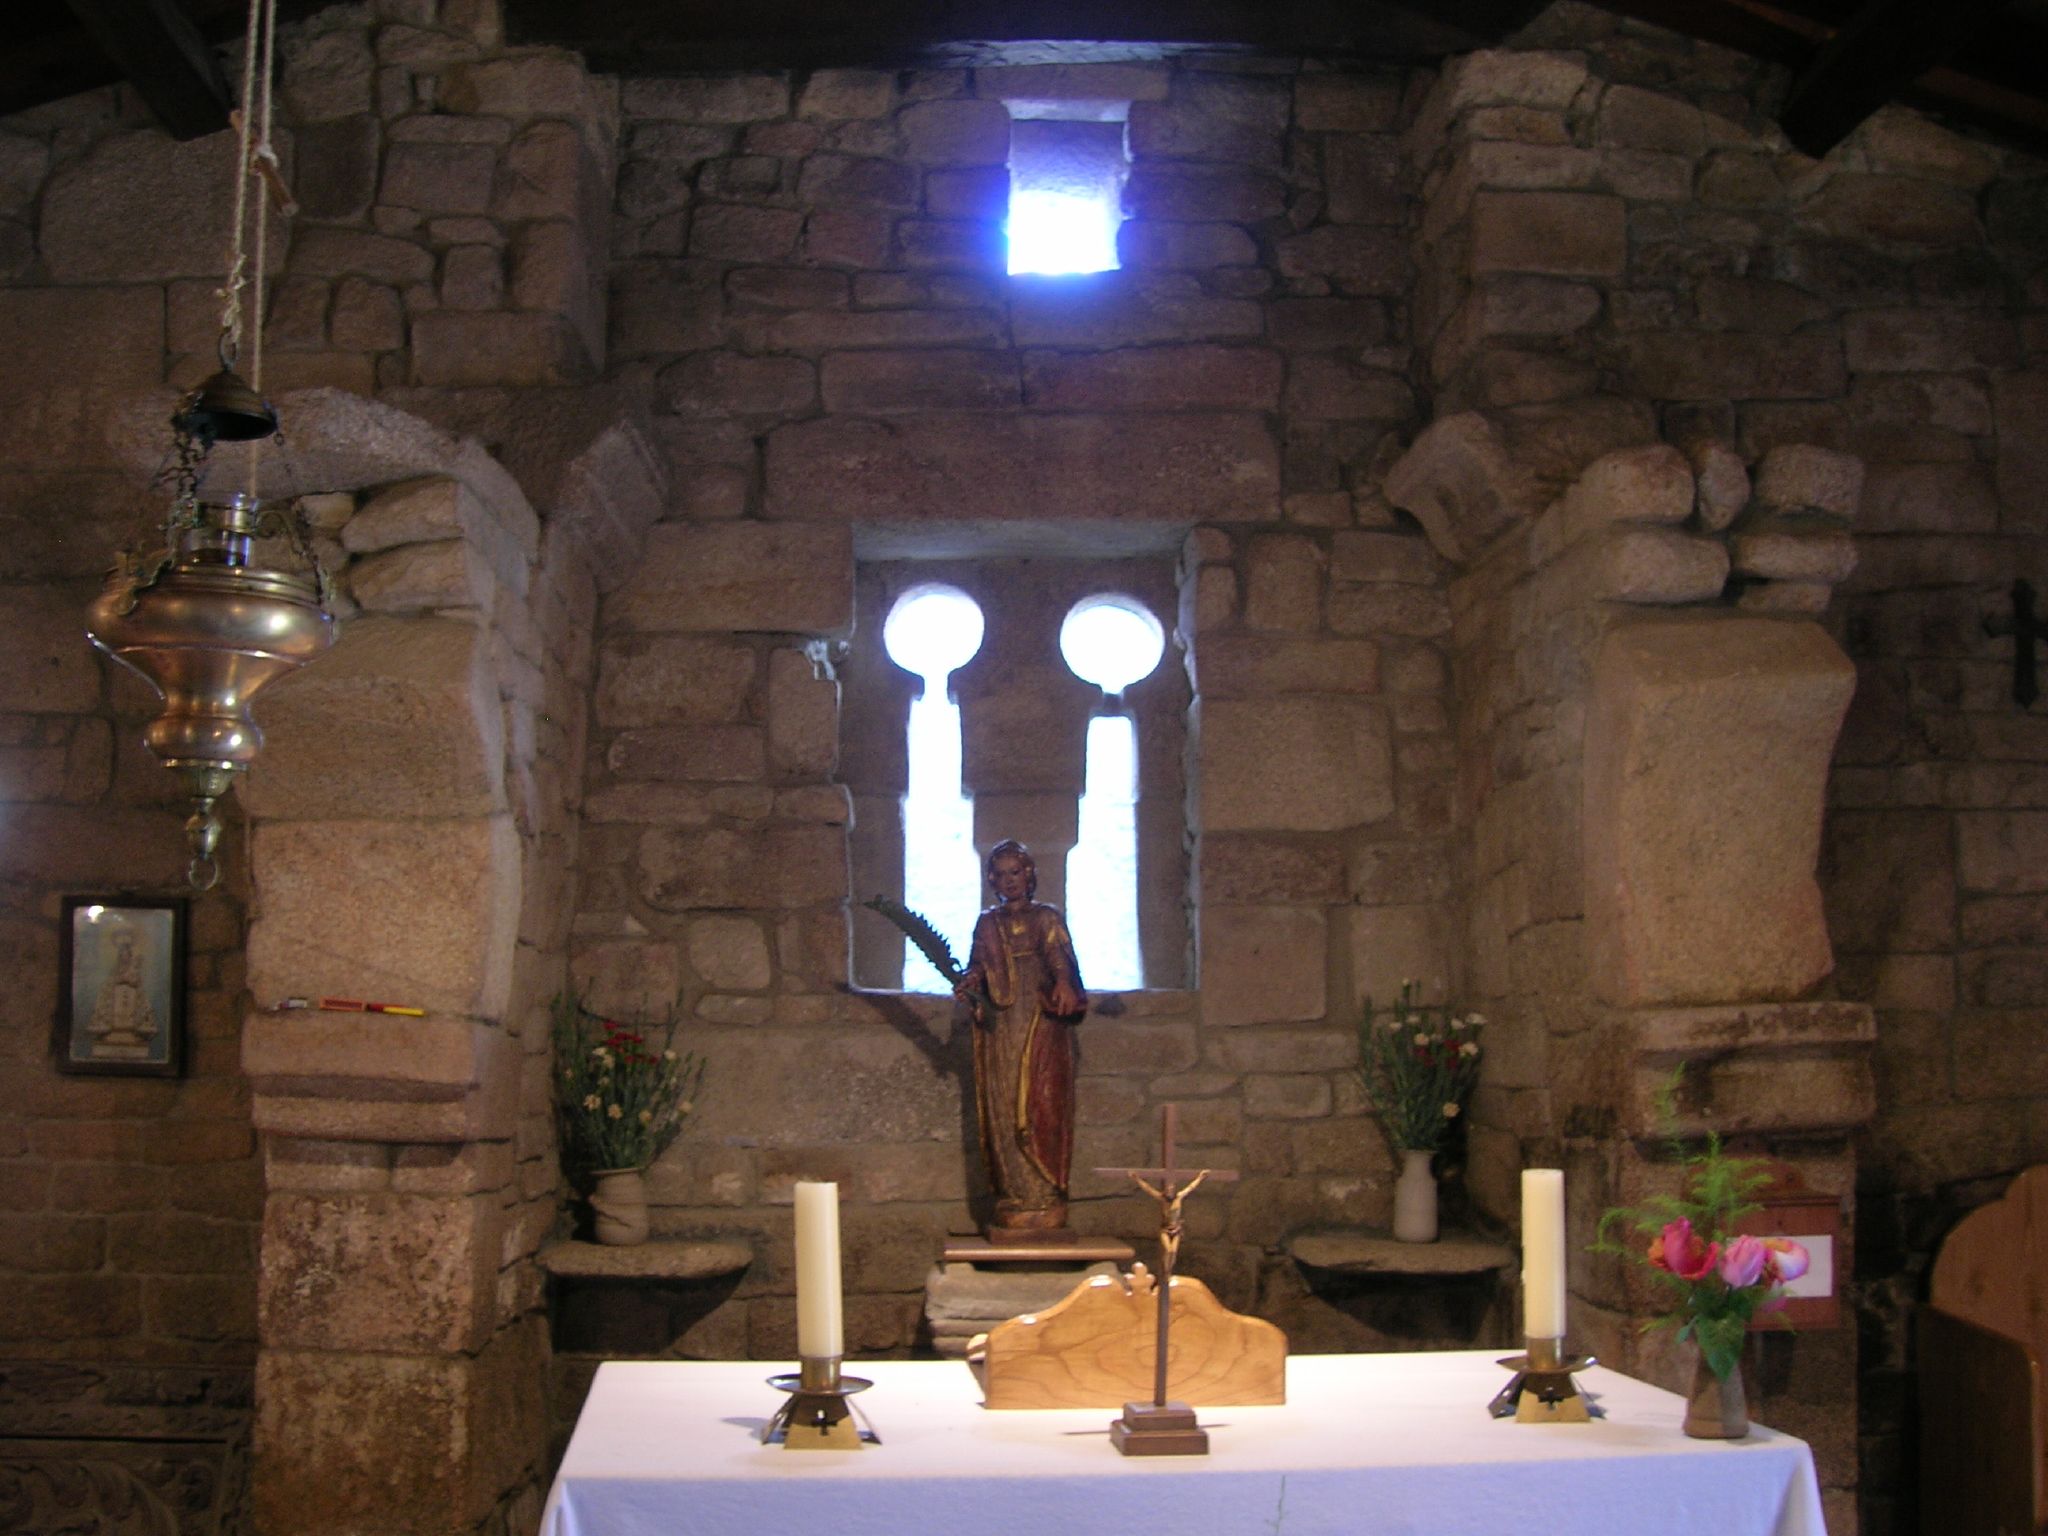 the alter of an old catholic church with candles and a shrine